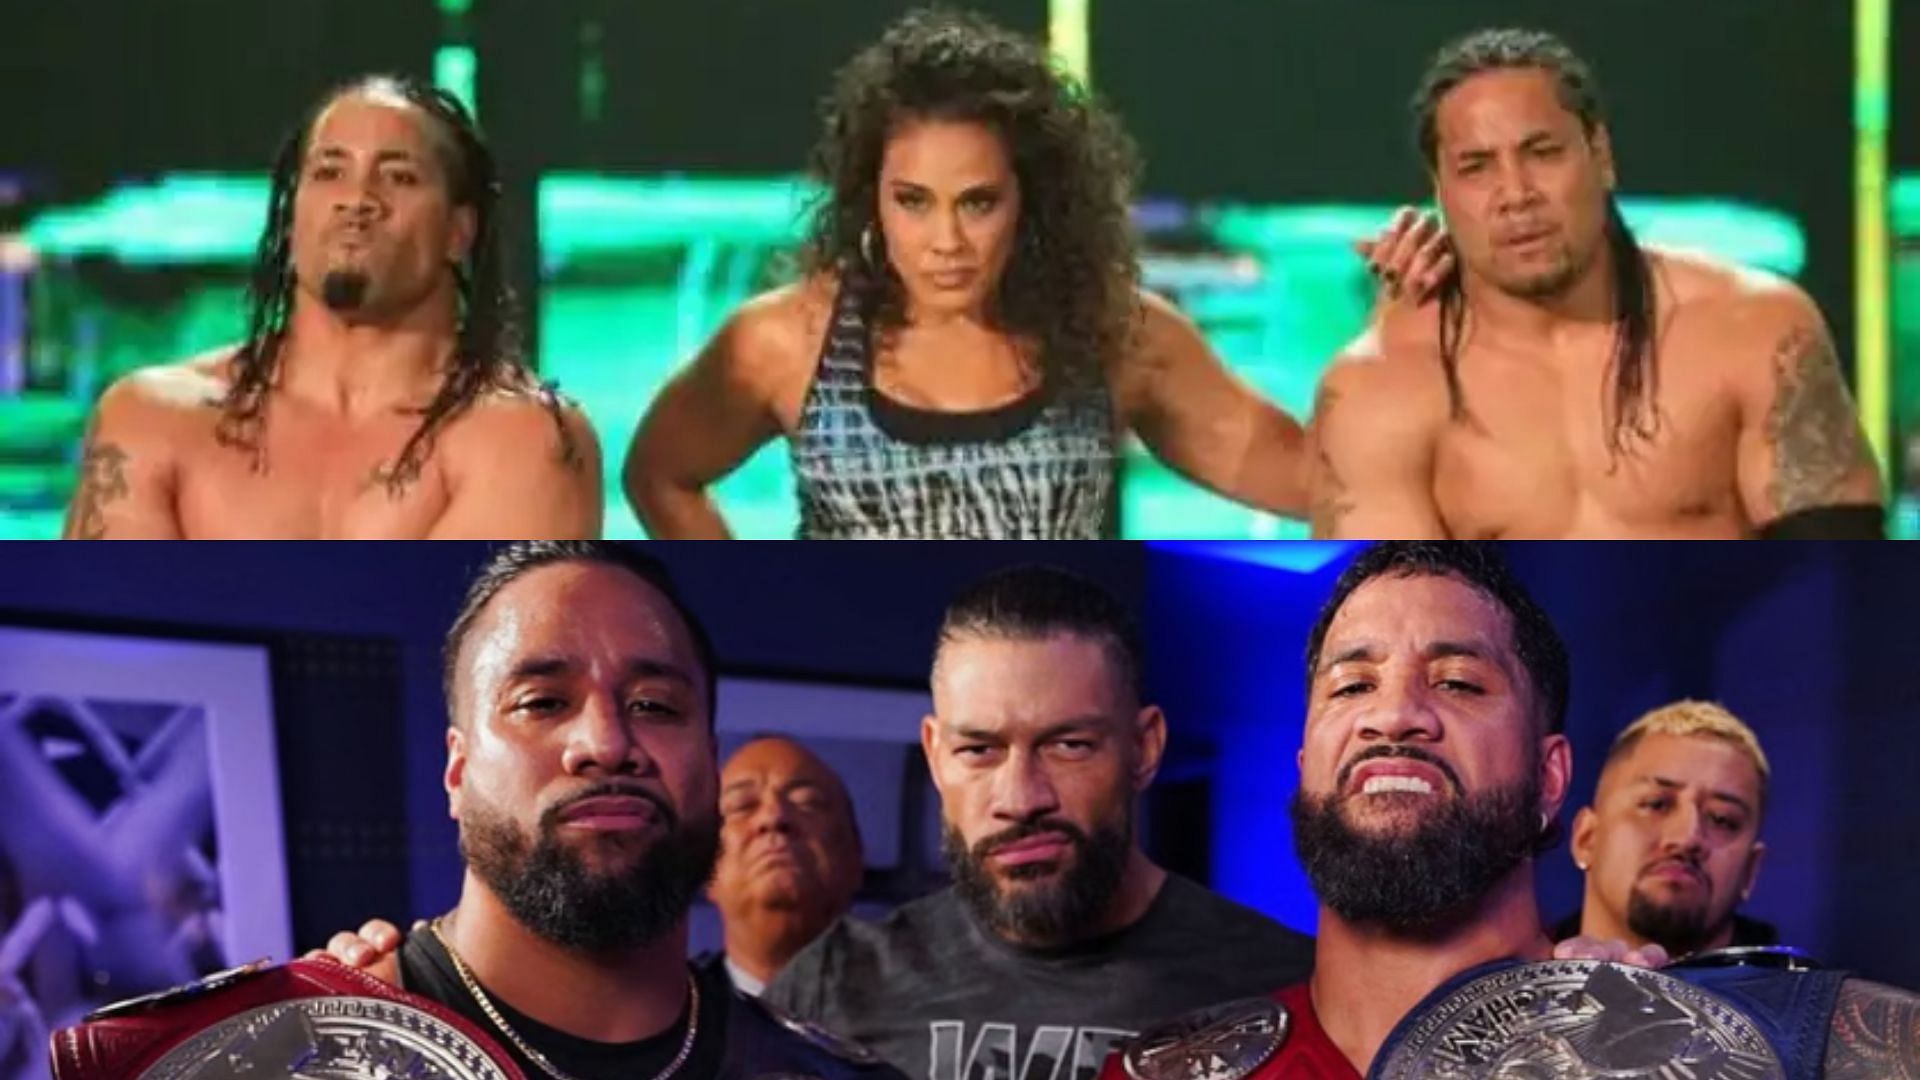 Tamina is related to Roman Reigns, Solo Sikoa and The Usos